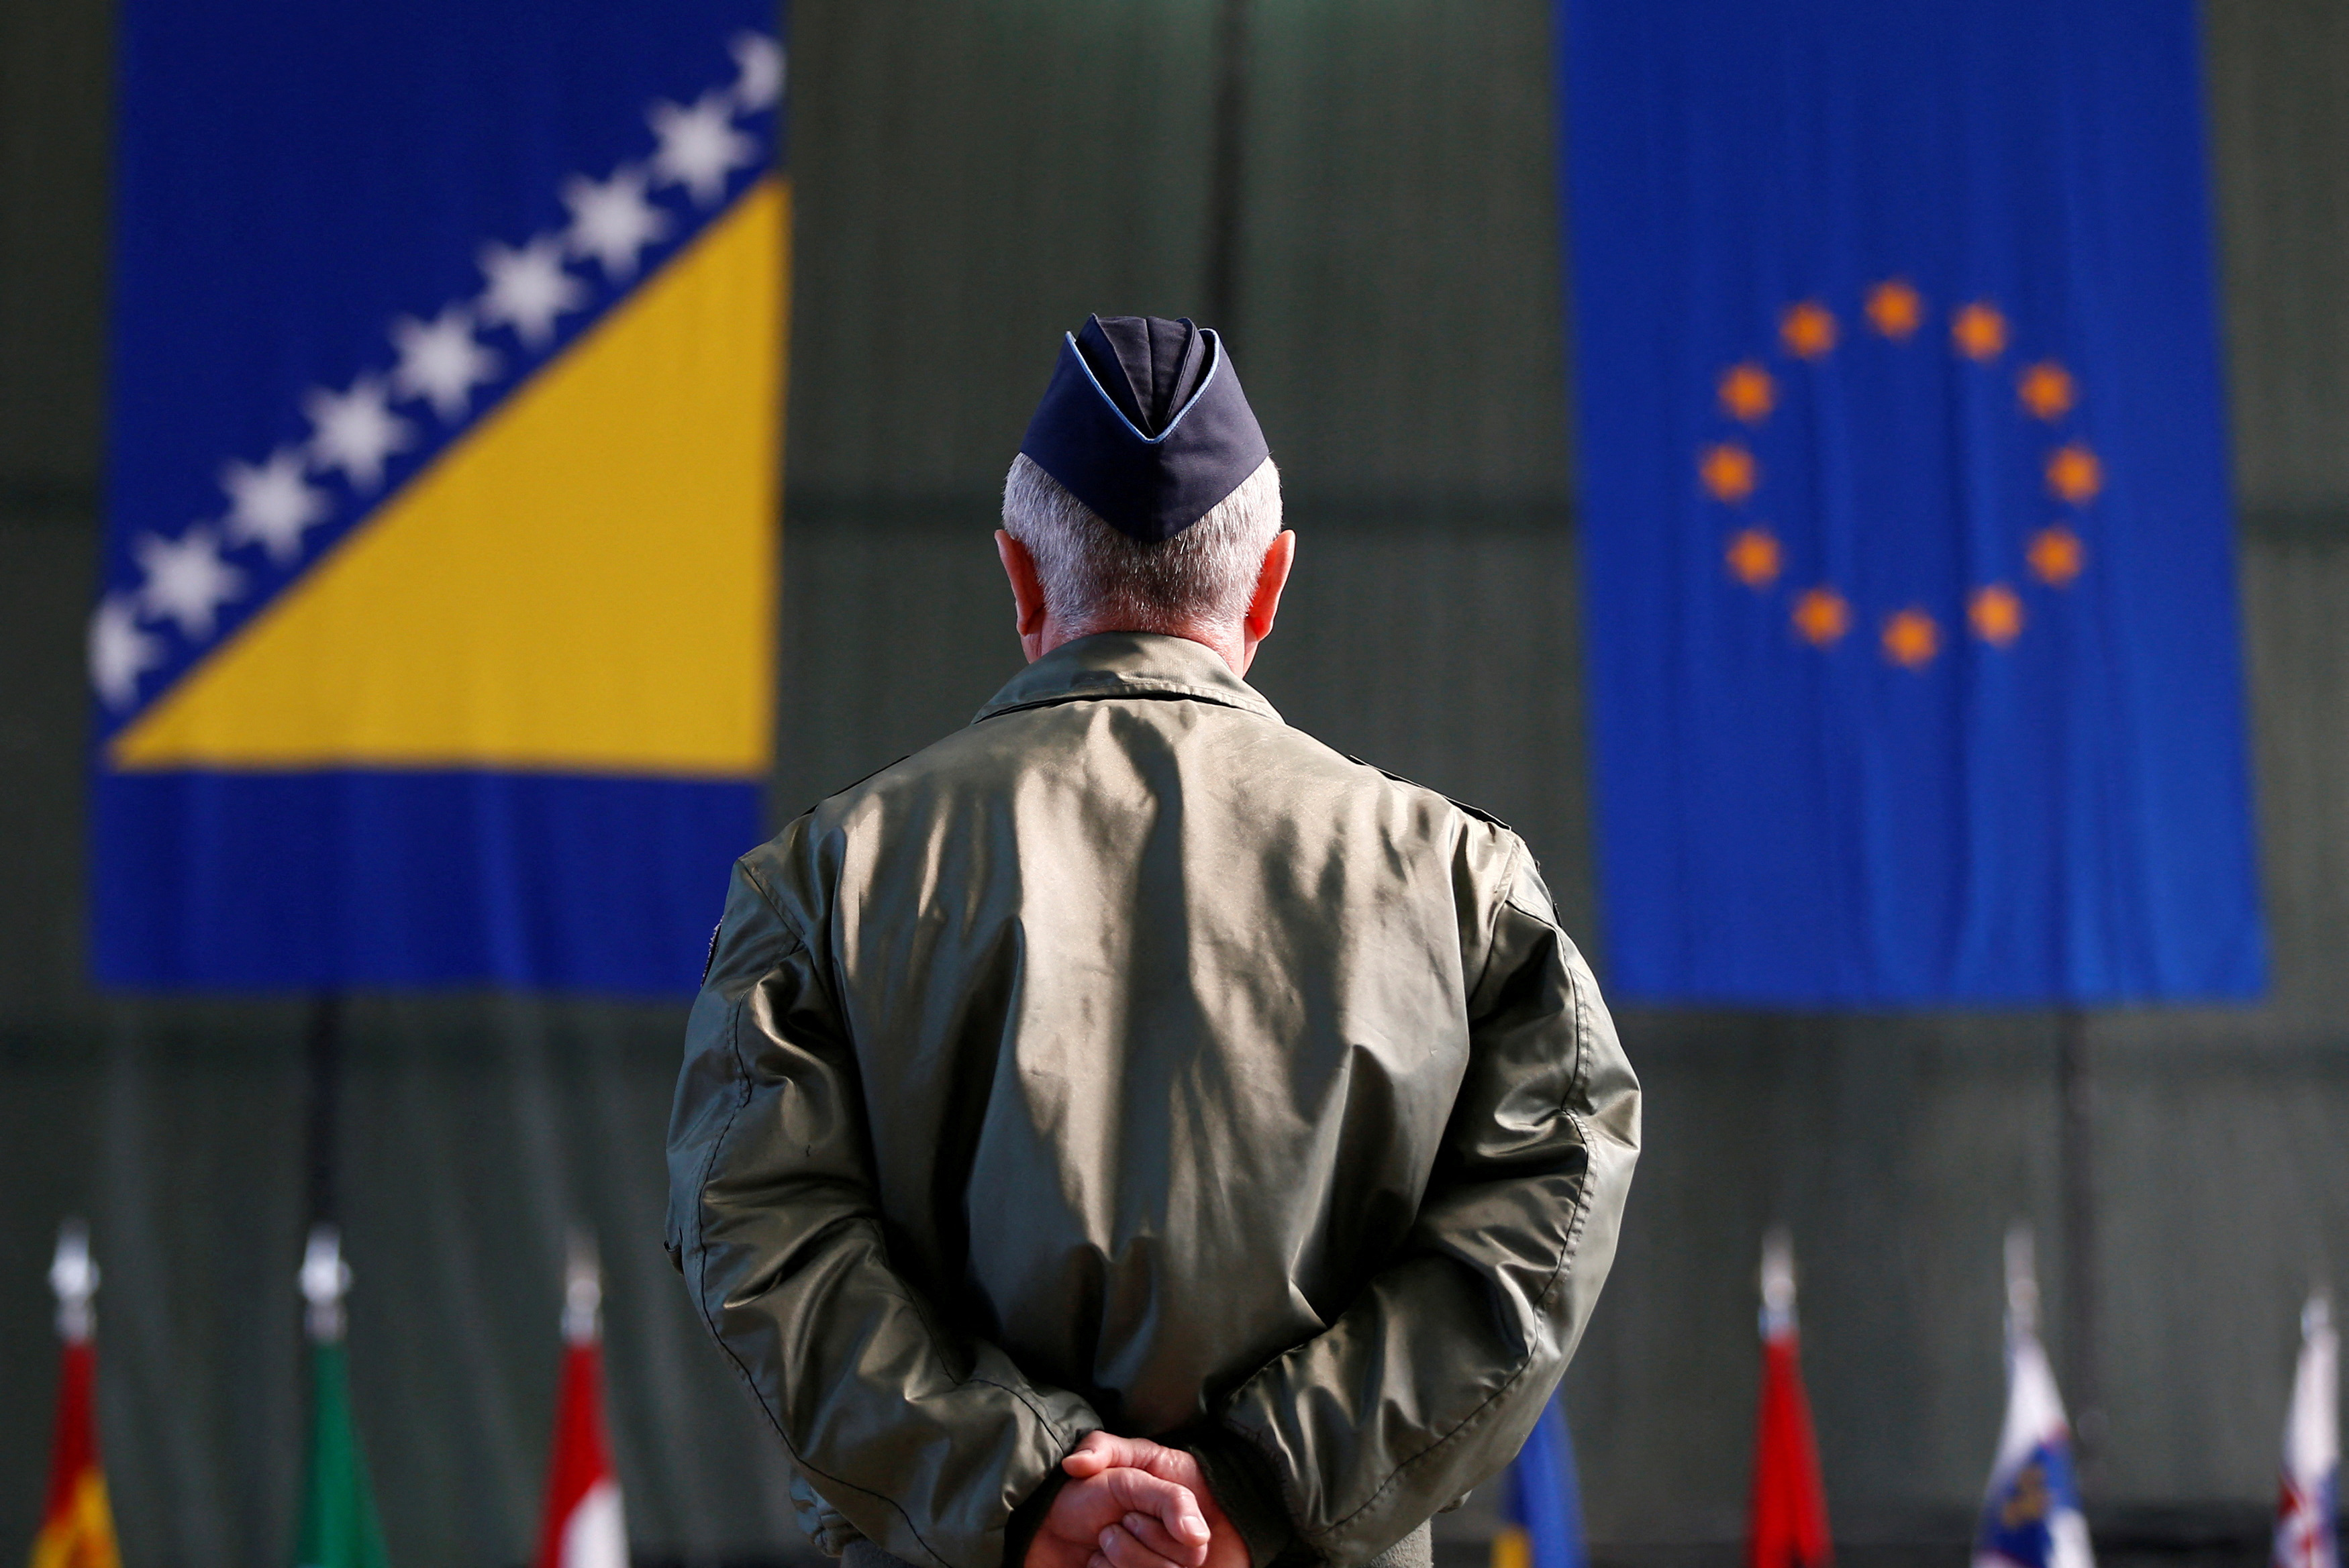 Member of European Forces (EUFOR) stands in front of the Bosnia and Herzegovina and EU flags during Change of Command Ceremony, in Sarajevo